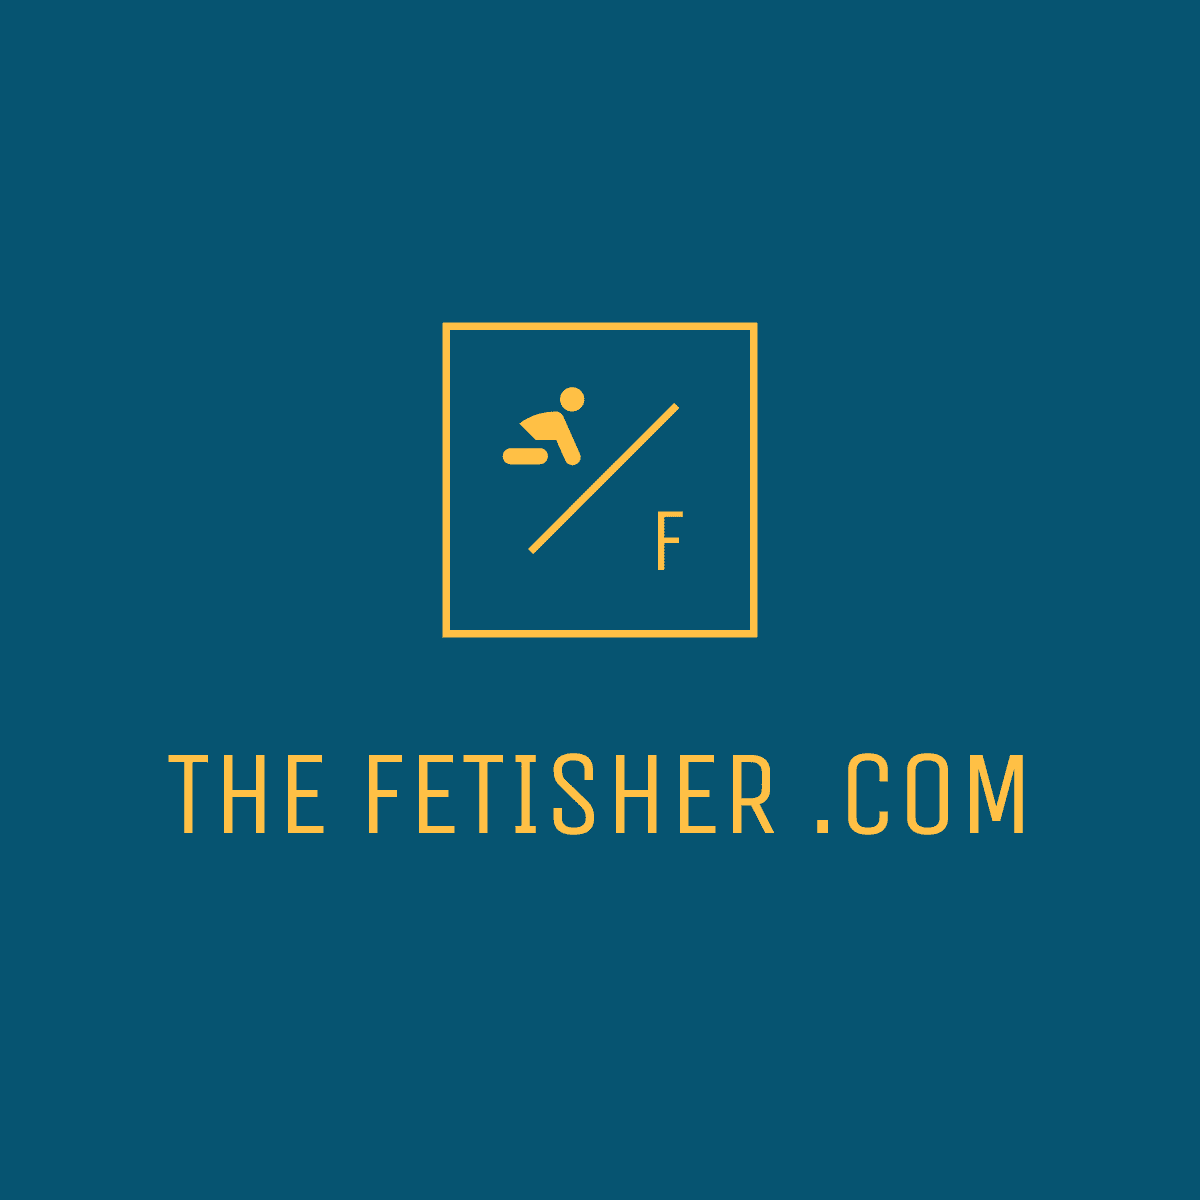 The Fetisher